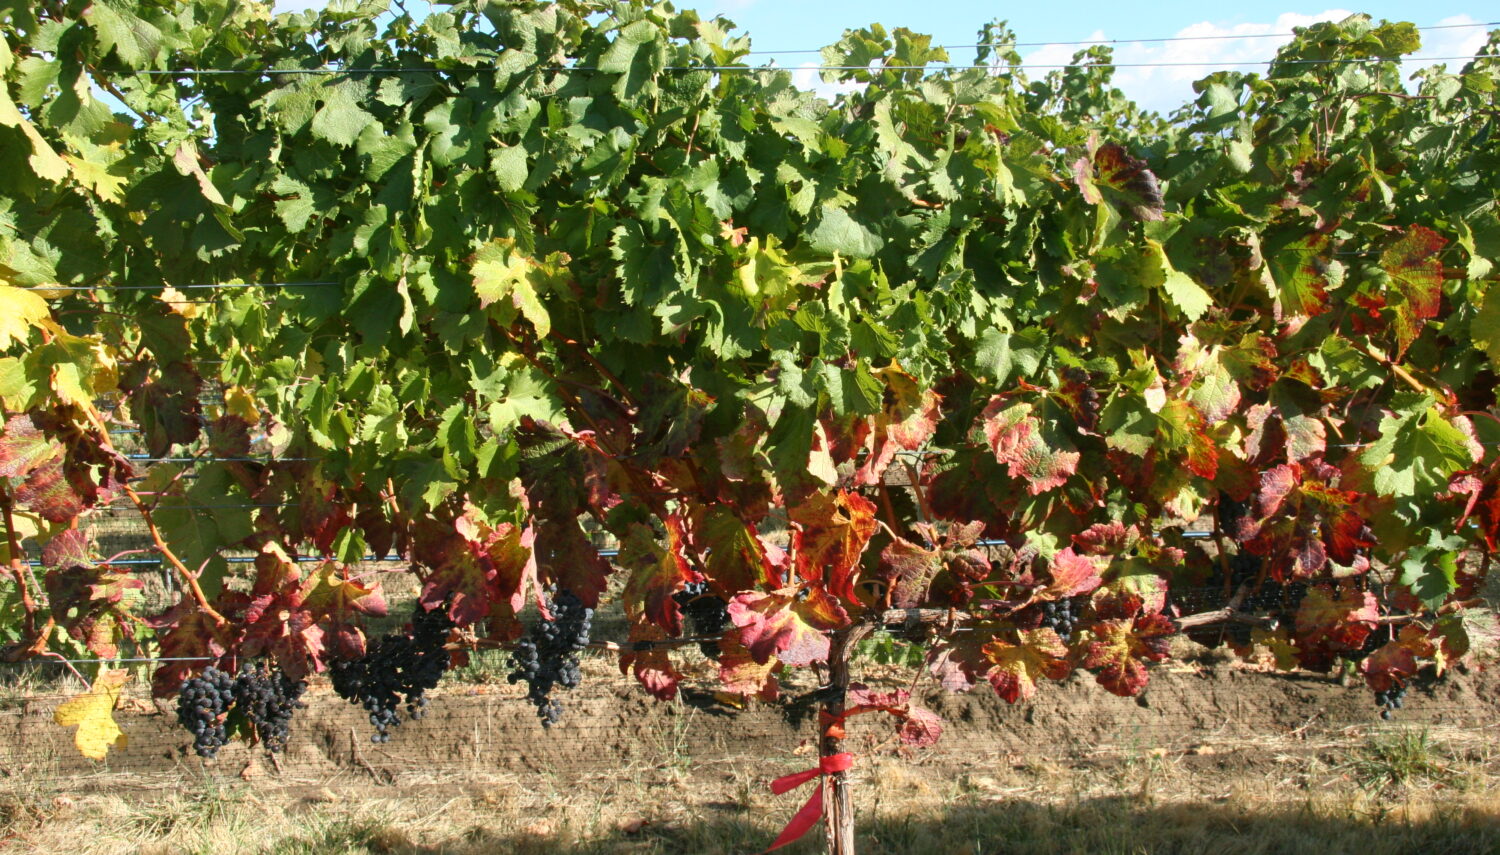 A row of grape vines with fruit hanging below.